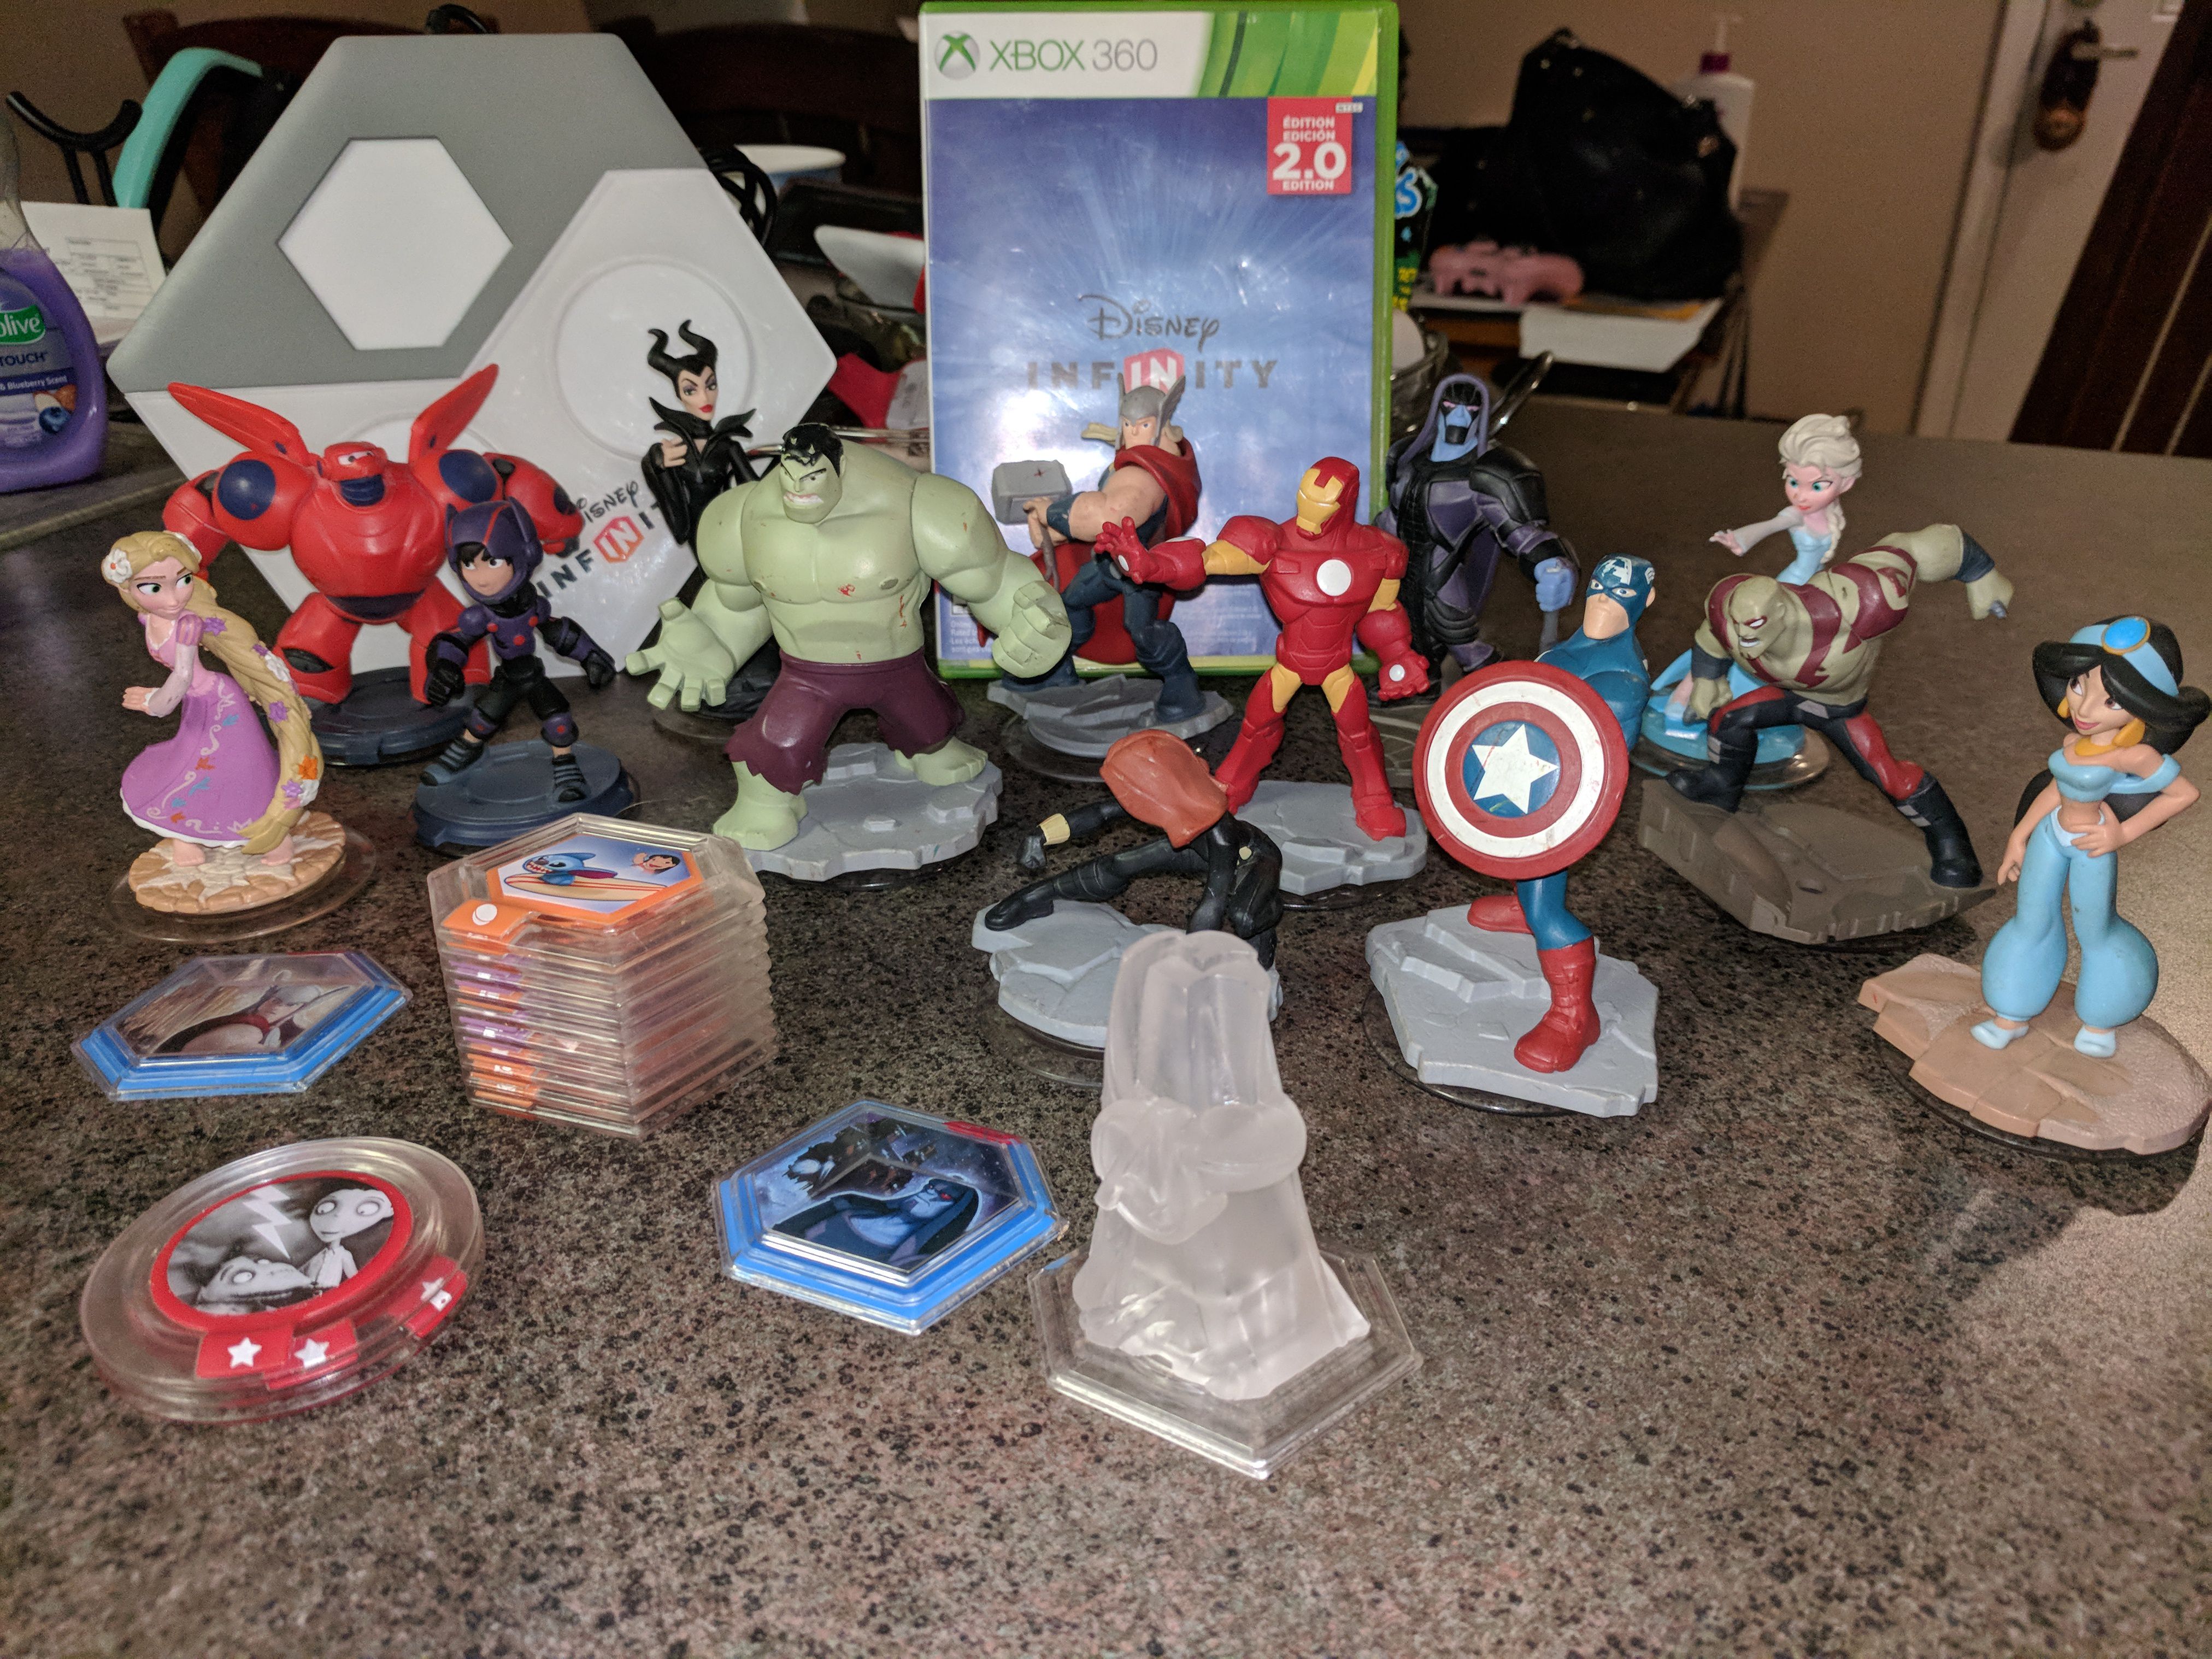 Xbox 360 Disney Infinity with 13 characters and add on chips